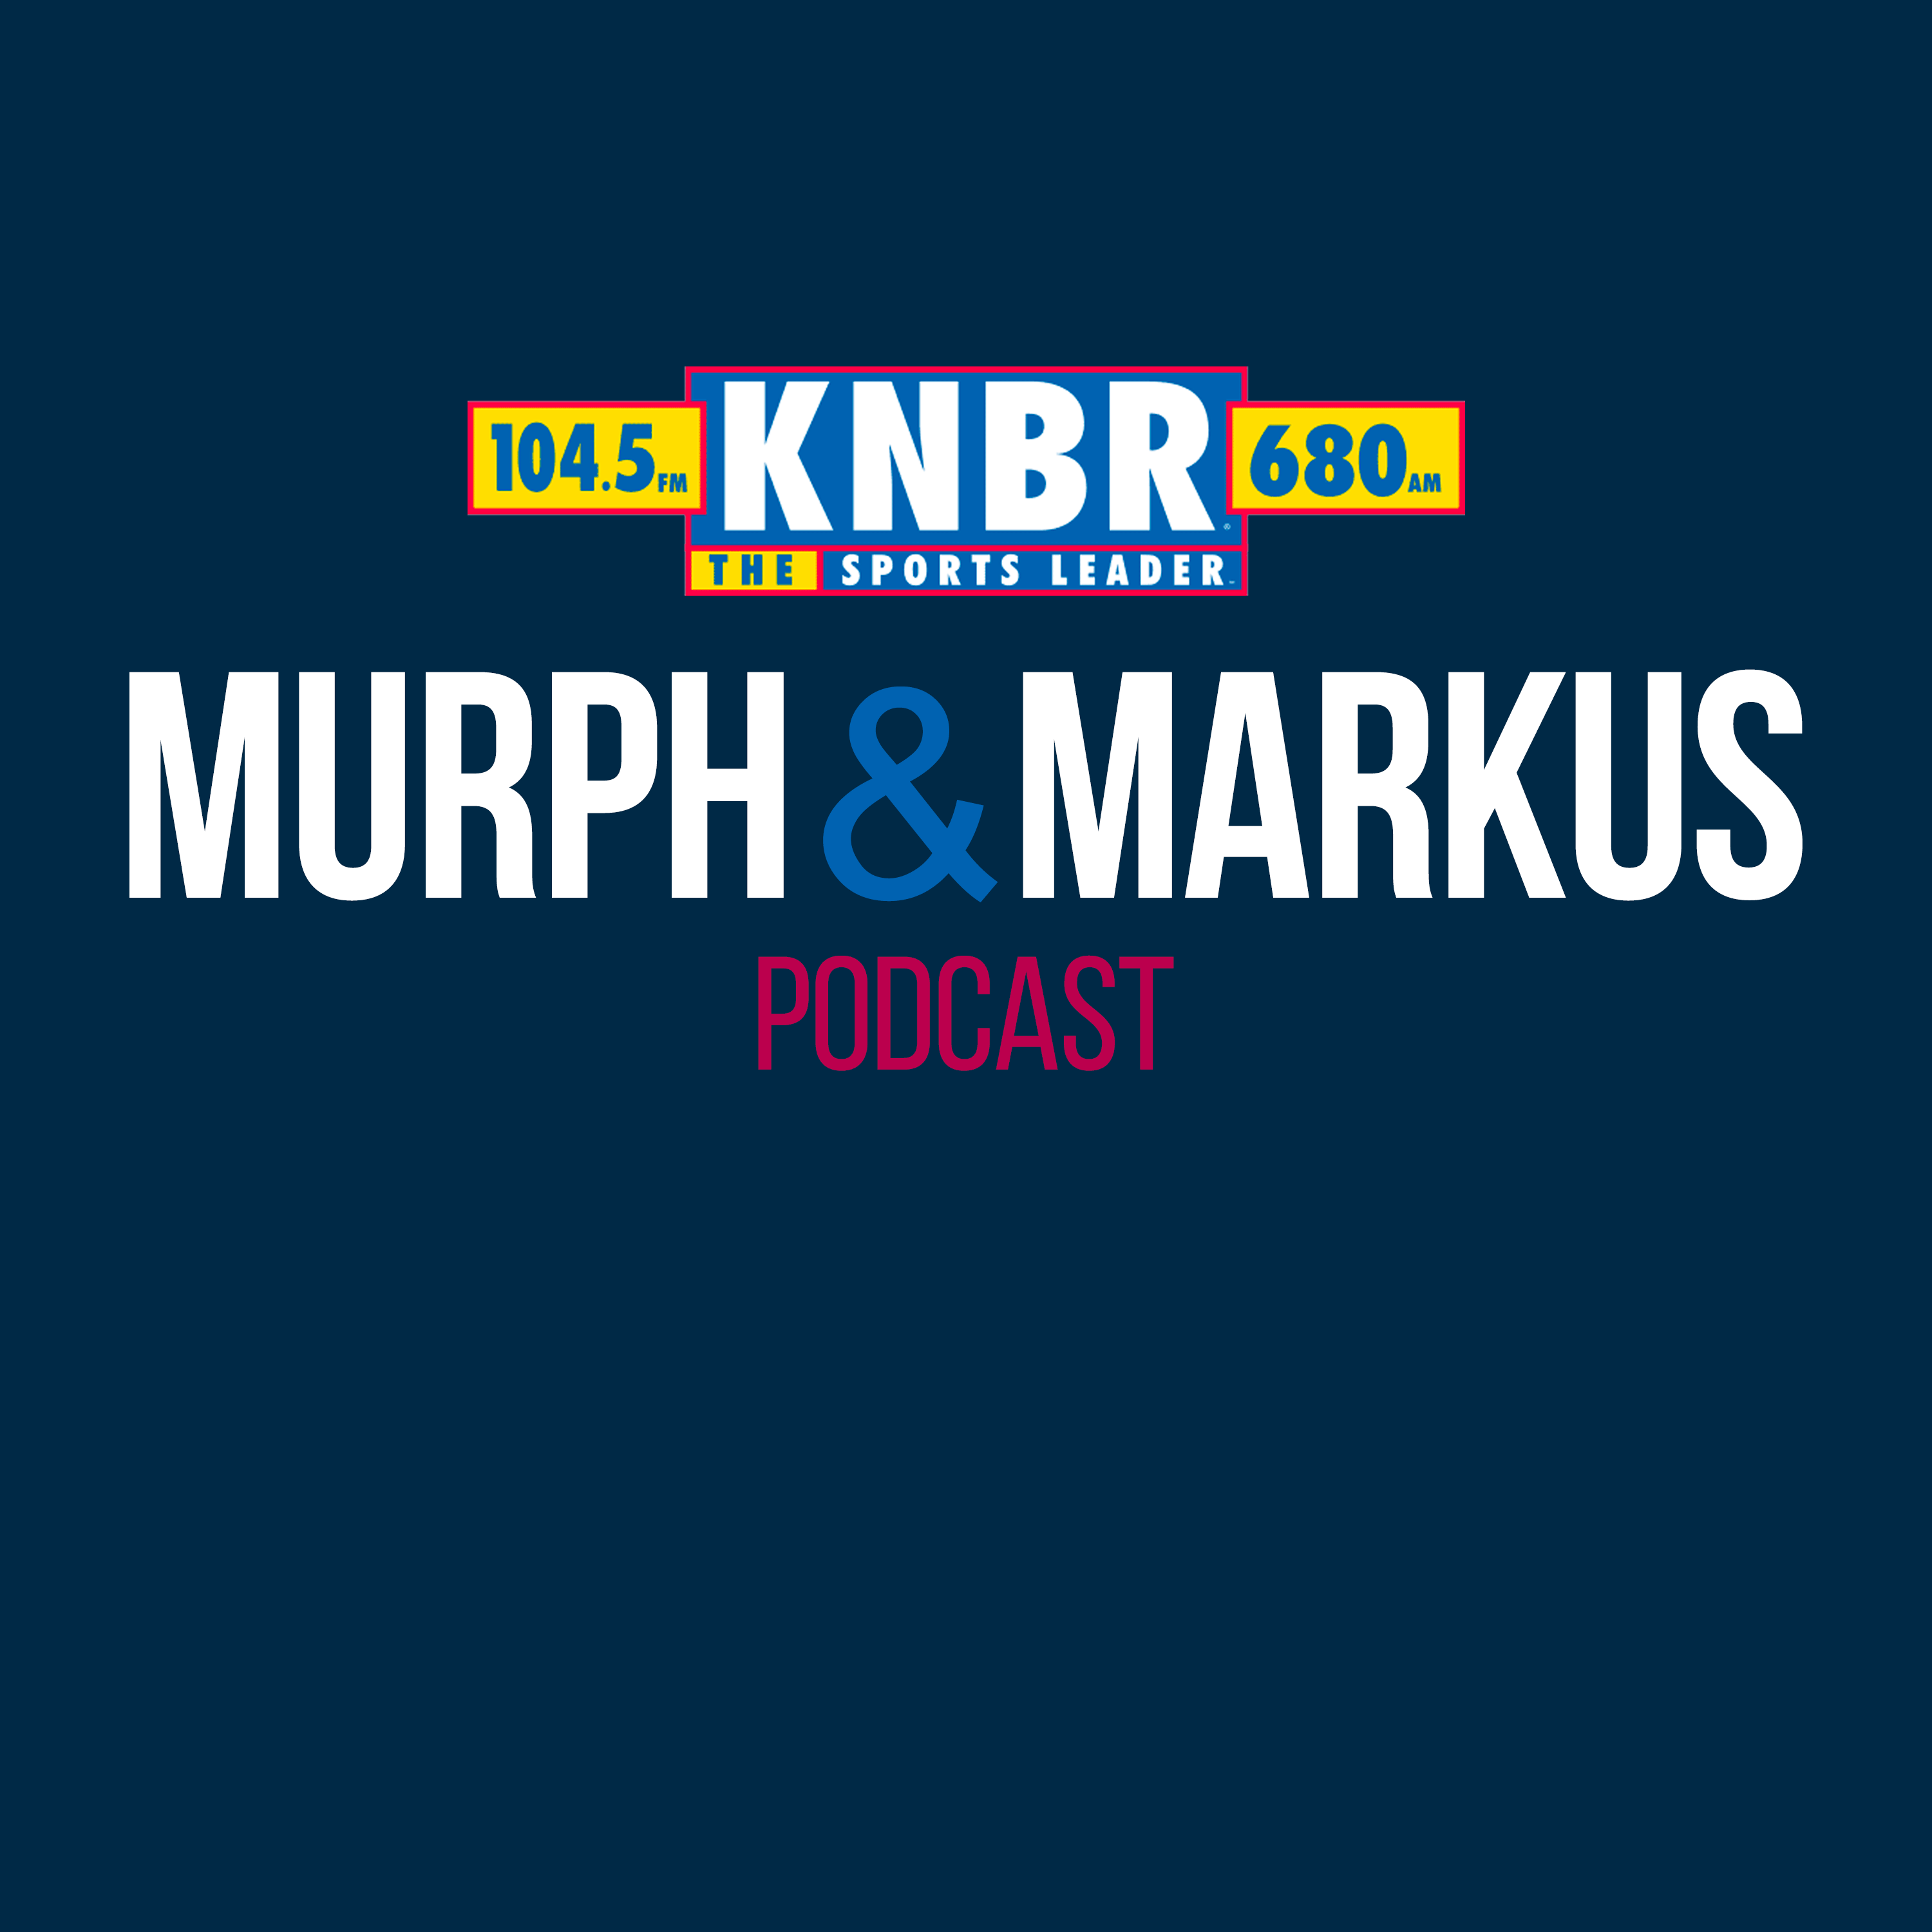 2-16 Bob Melvin joins Murph & Markus to reminisce over other painful Bay Area losses outside of Super Bowl 58 and give a depth chart update on the Giants heading into spring training